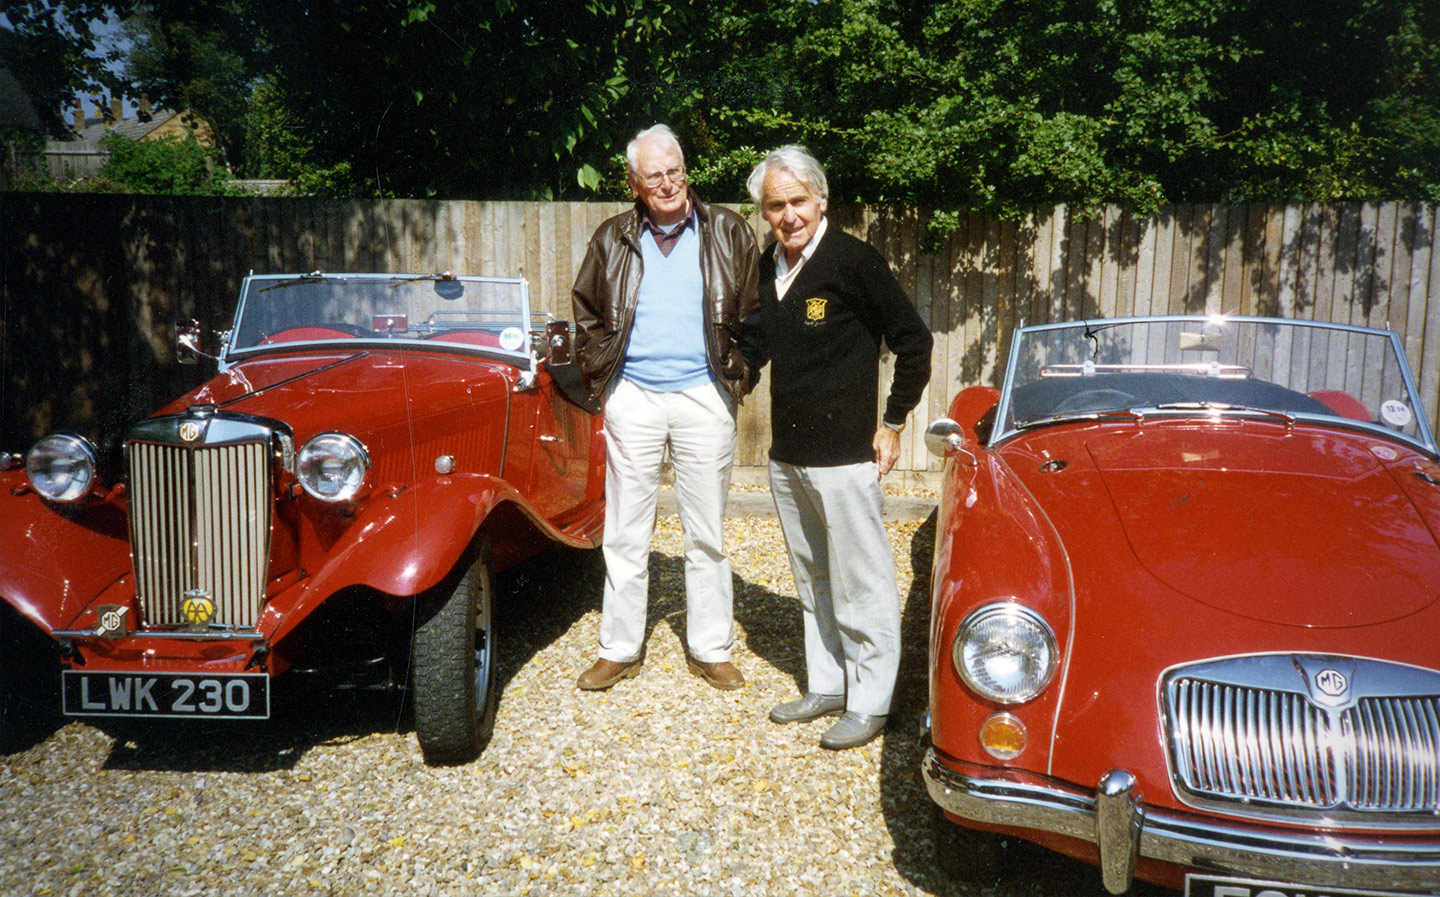 Raymond Greenaway with best friend and fellow MG enthusiast Dennis, and their cars.